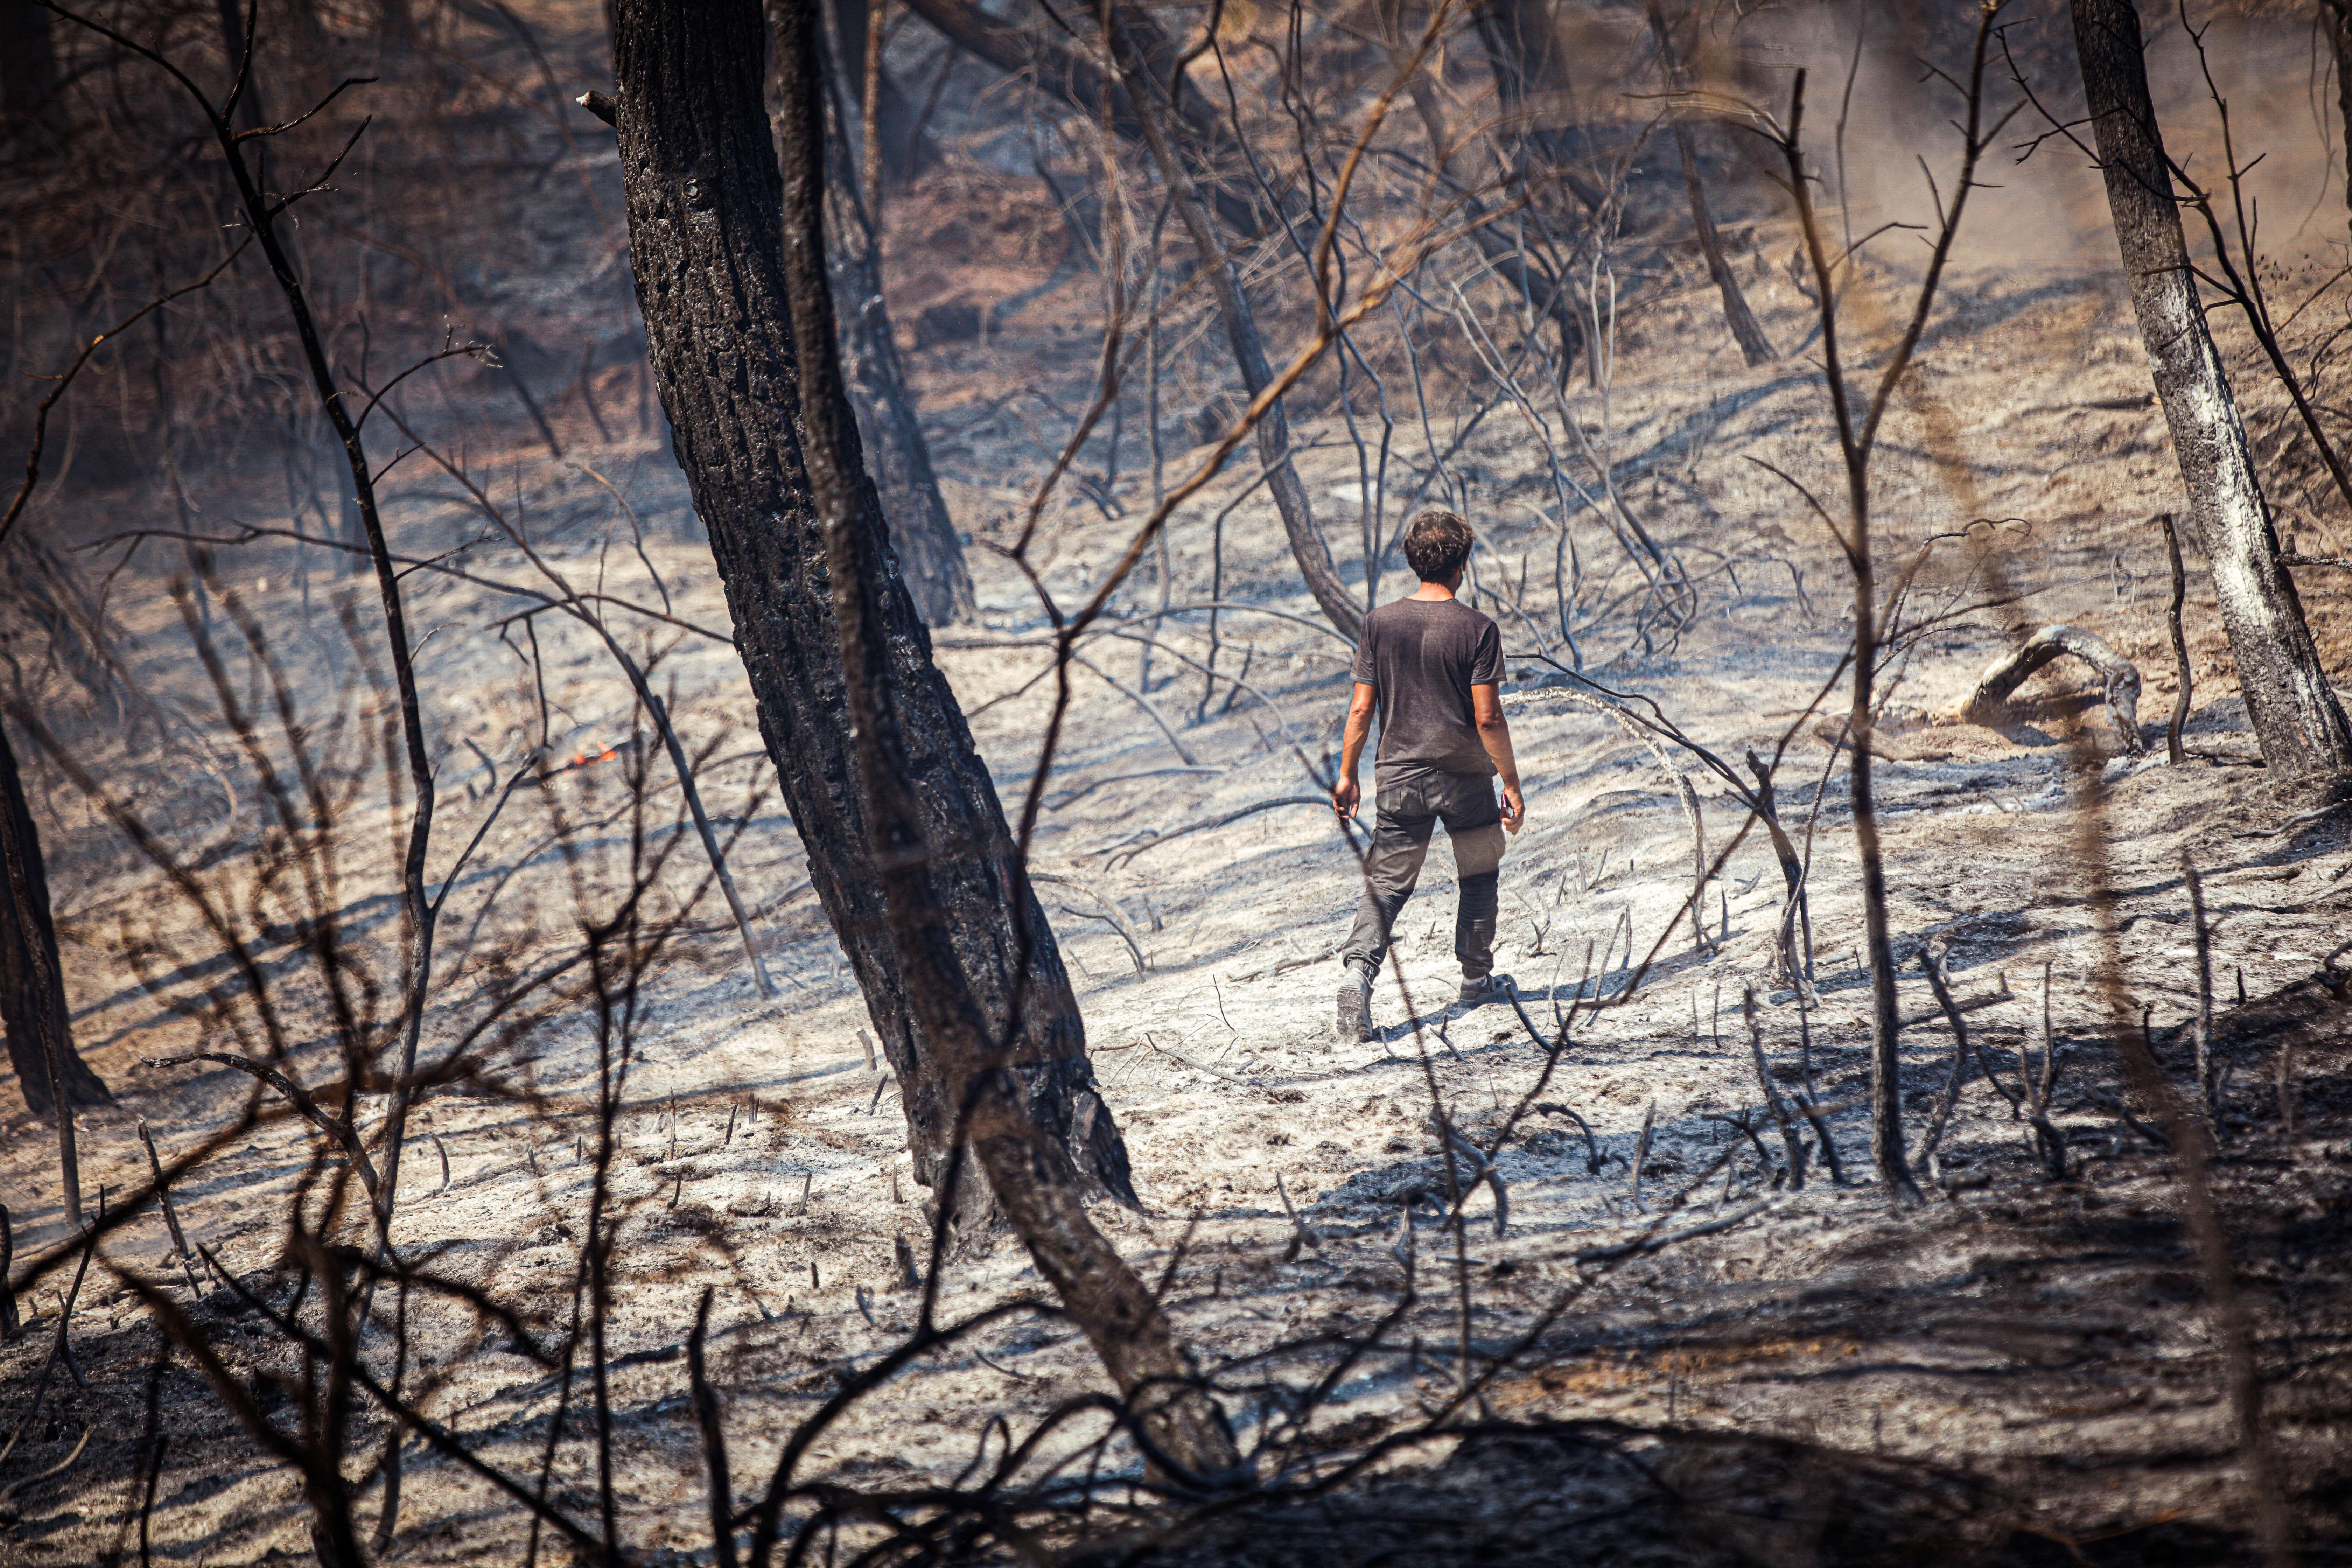 Ravaged by fire: The victims of Turkey’s fire season